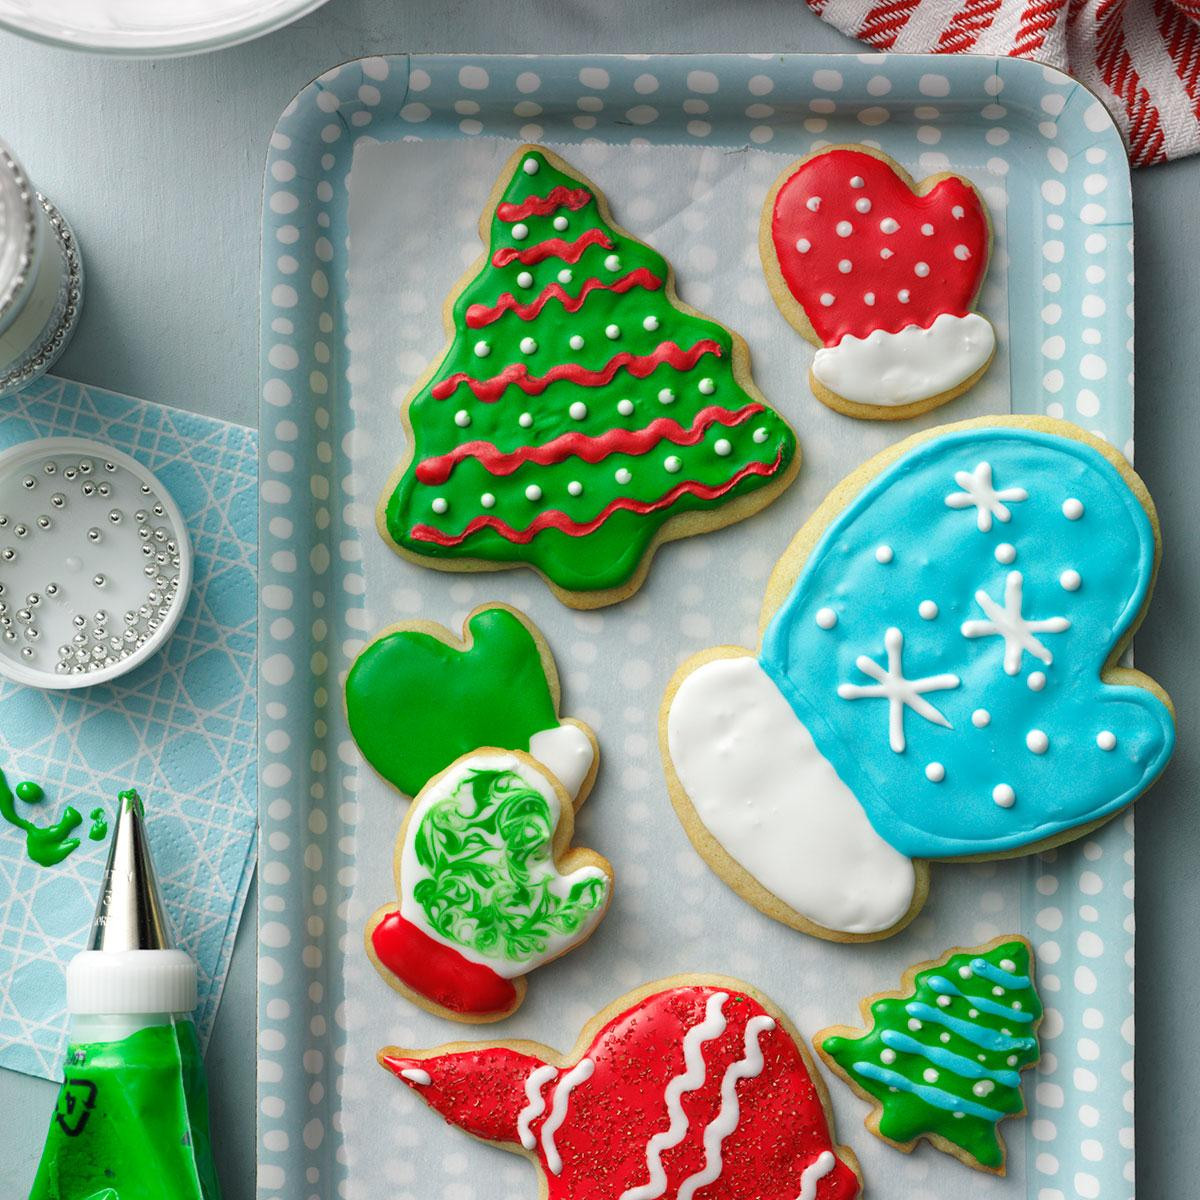 Receipes Christmas Cookies
 10 Best Christmas Cookie Recipes